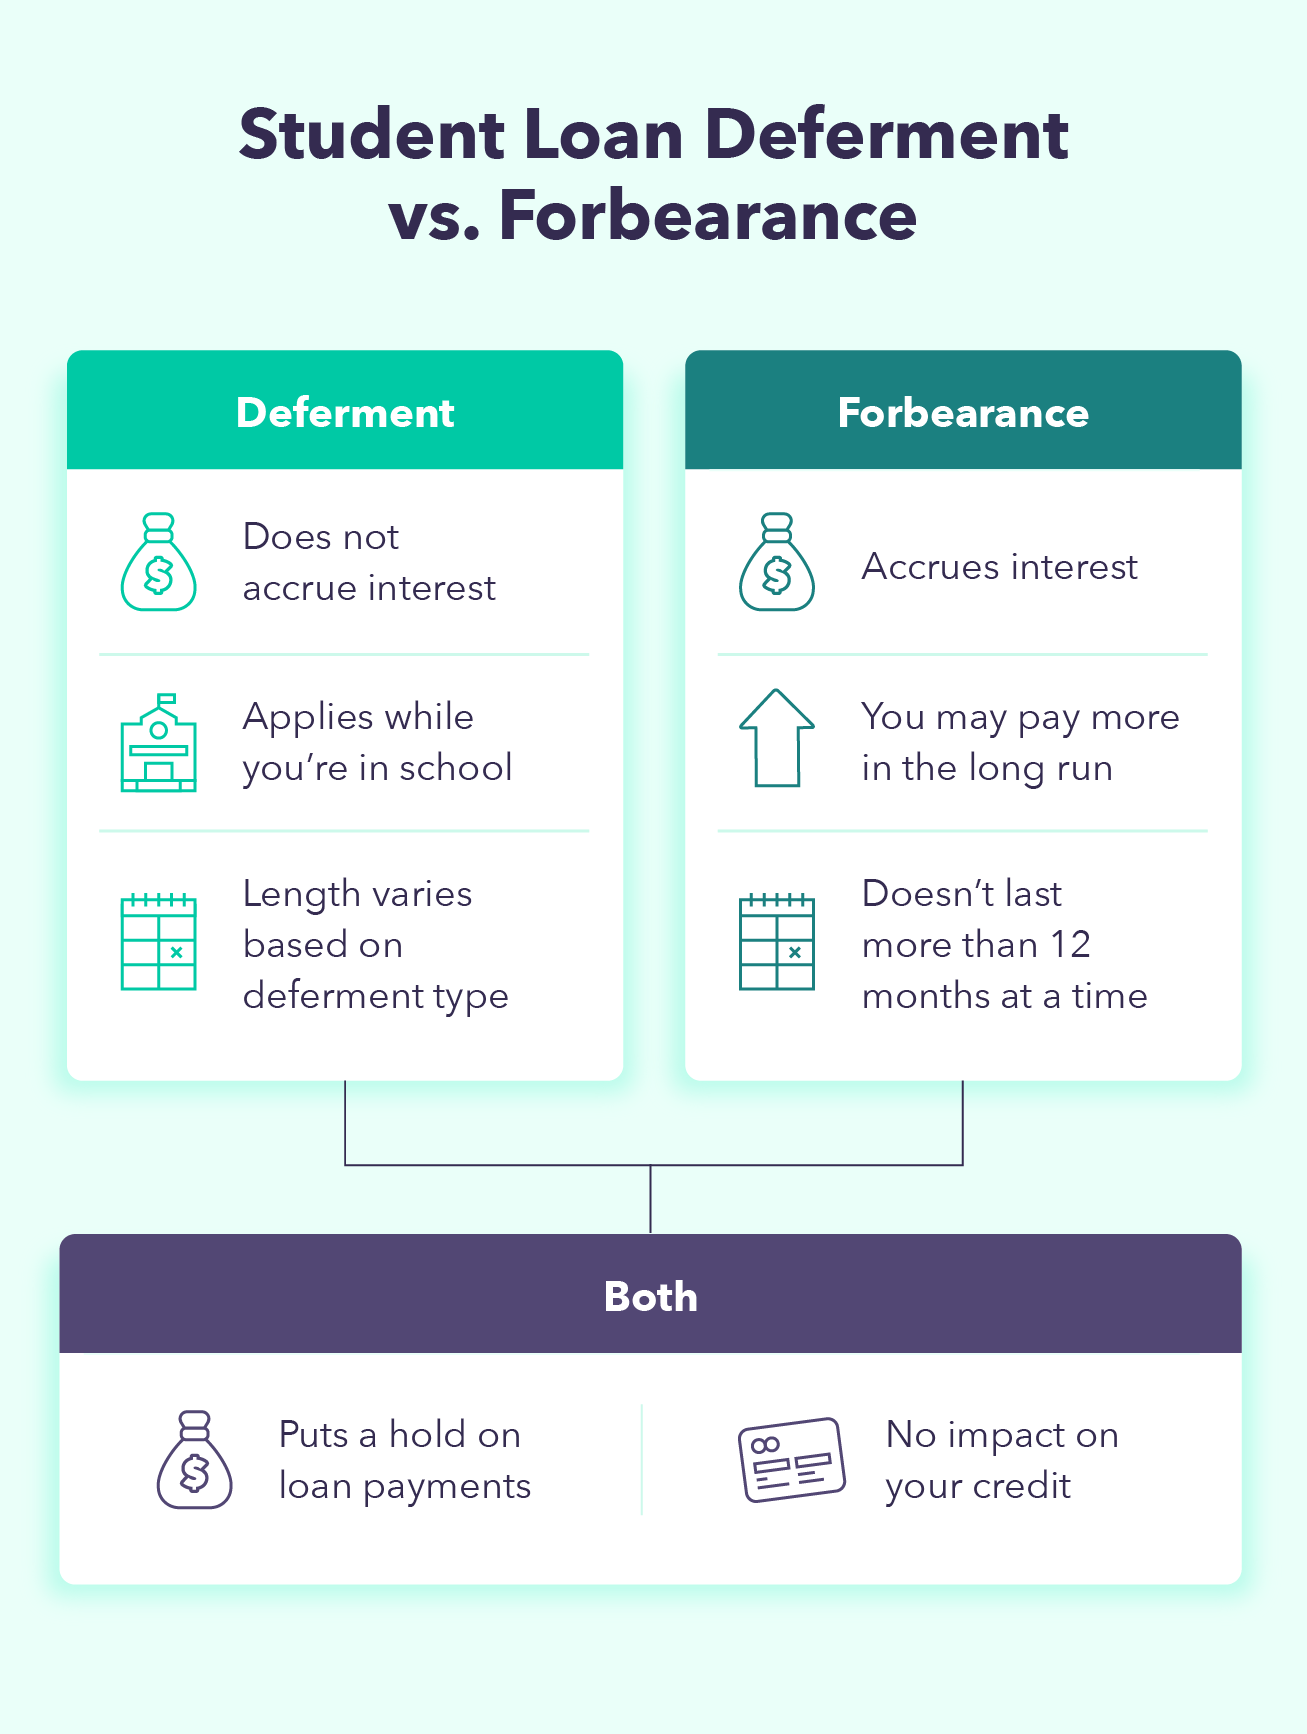 A graphic overviews the differences and similarities between student loan deferment and student loan forbearance.